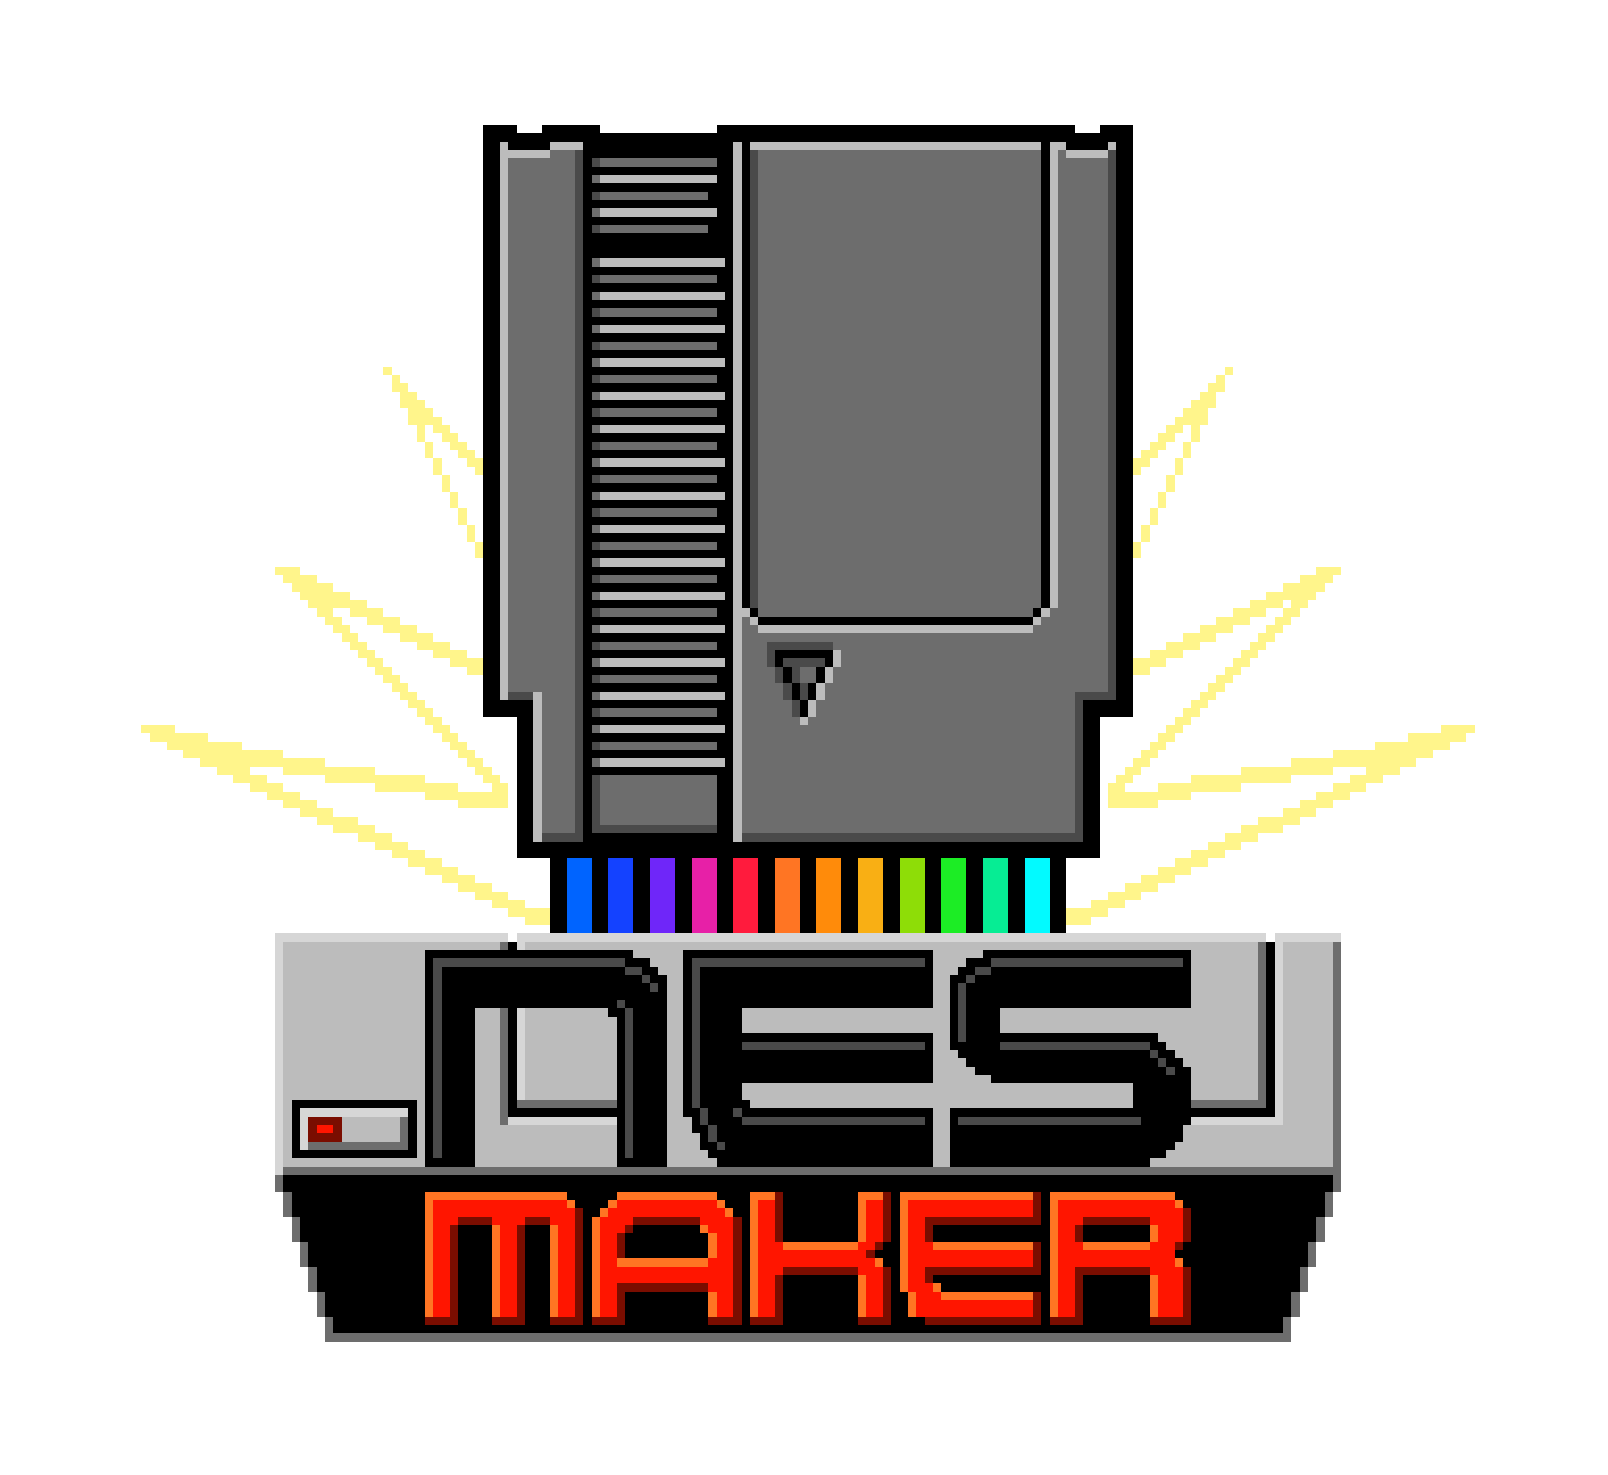 NESMAker, Make YOUR NES Game.